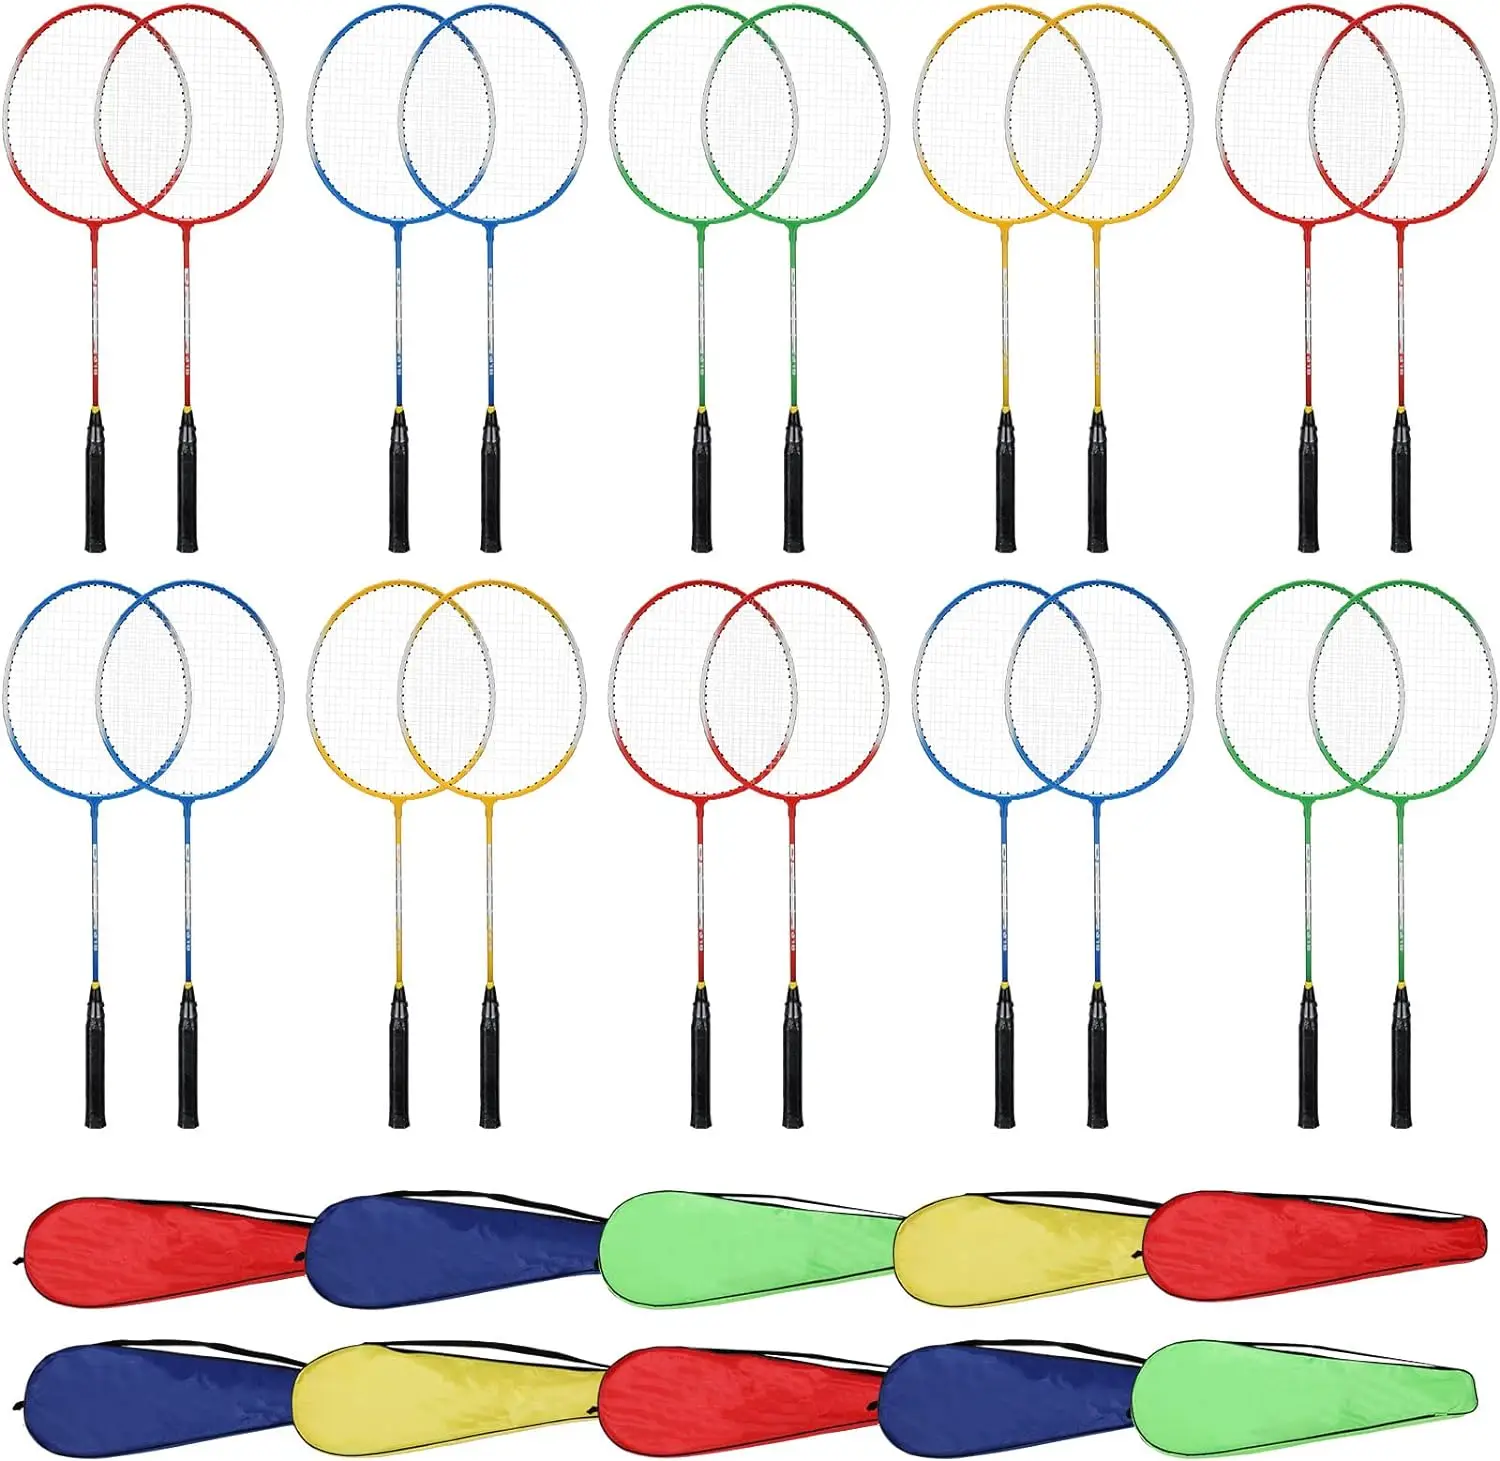 

20 Pieces Badminton Rackets Set with 10 Carrying Bag Lightweight Badminton Rackets Set for Adults Sports Badminton Racquet for